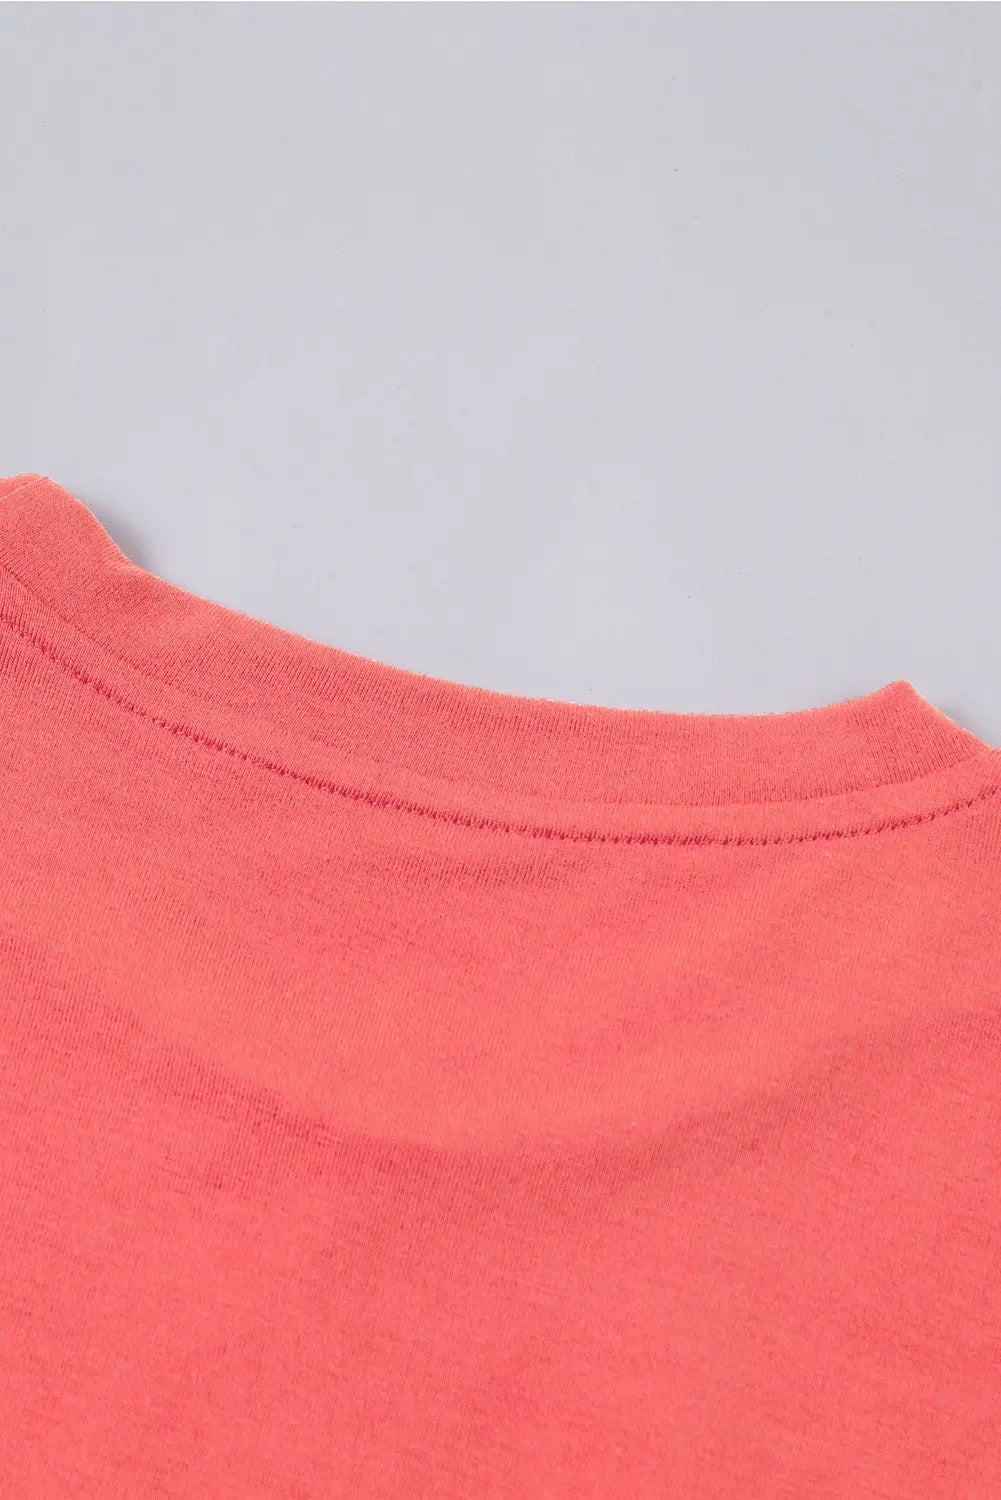 Red solid color crew neck tee - t-shirts